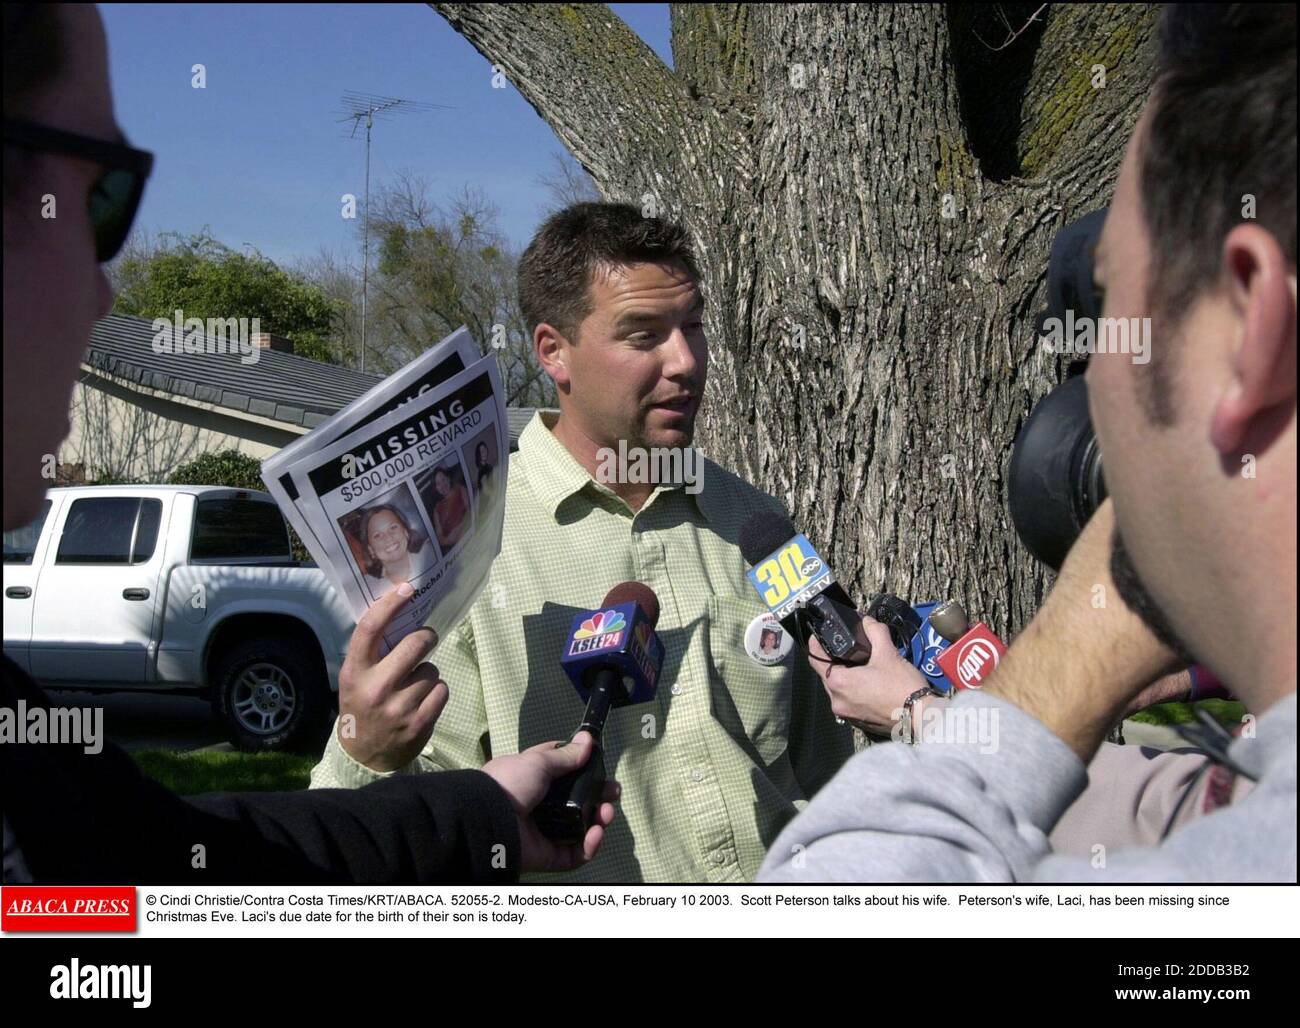 NO FILM, NO VIDEO, NO TV, NO DOCUMENTARY - © Cindi Christie/Contra Costa Times/KRT/ABACA. 52055-2. Modesto-CA-USA, February 10 2003. Scott Peterson talks about his wife. Peterson's wife, Laci, has been missing since Christmas Eve. Laci's due date for the birth of their son is today. Stock Photo